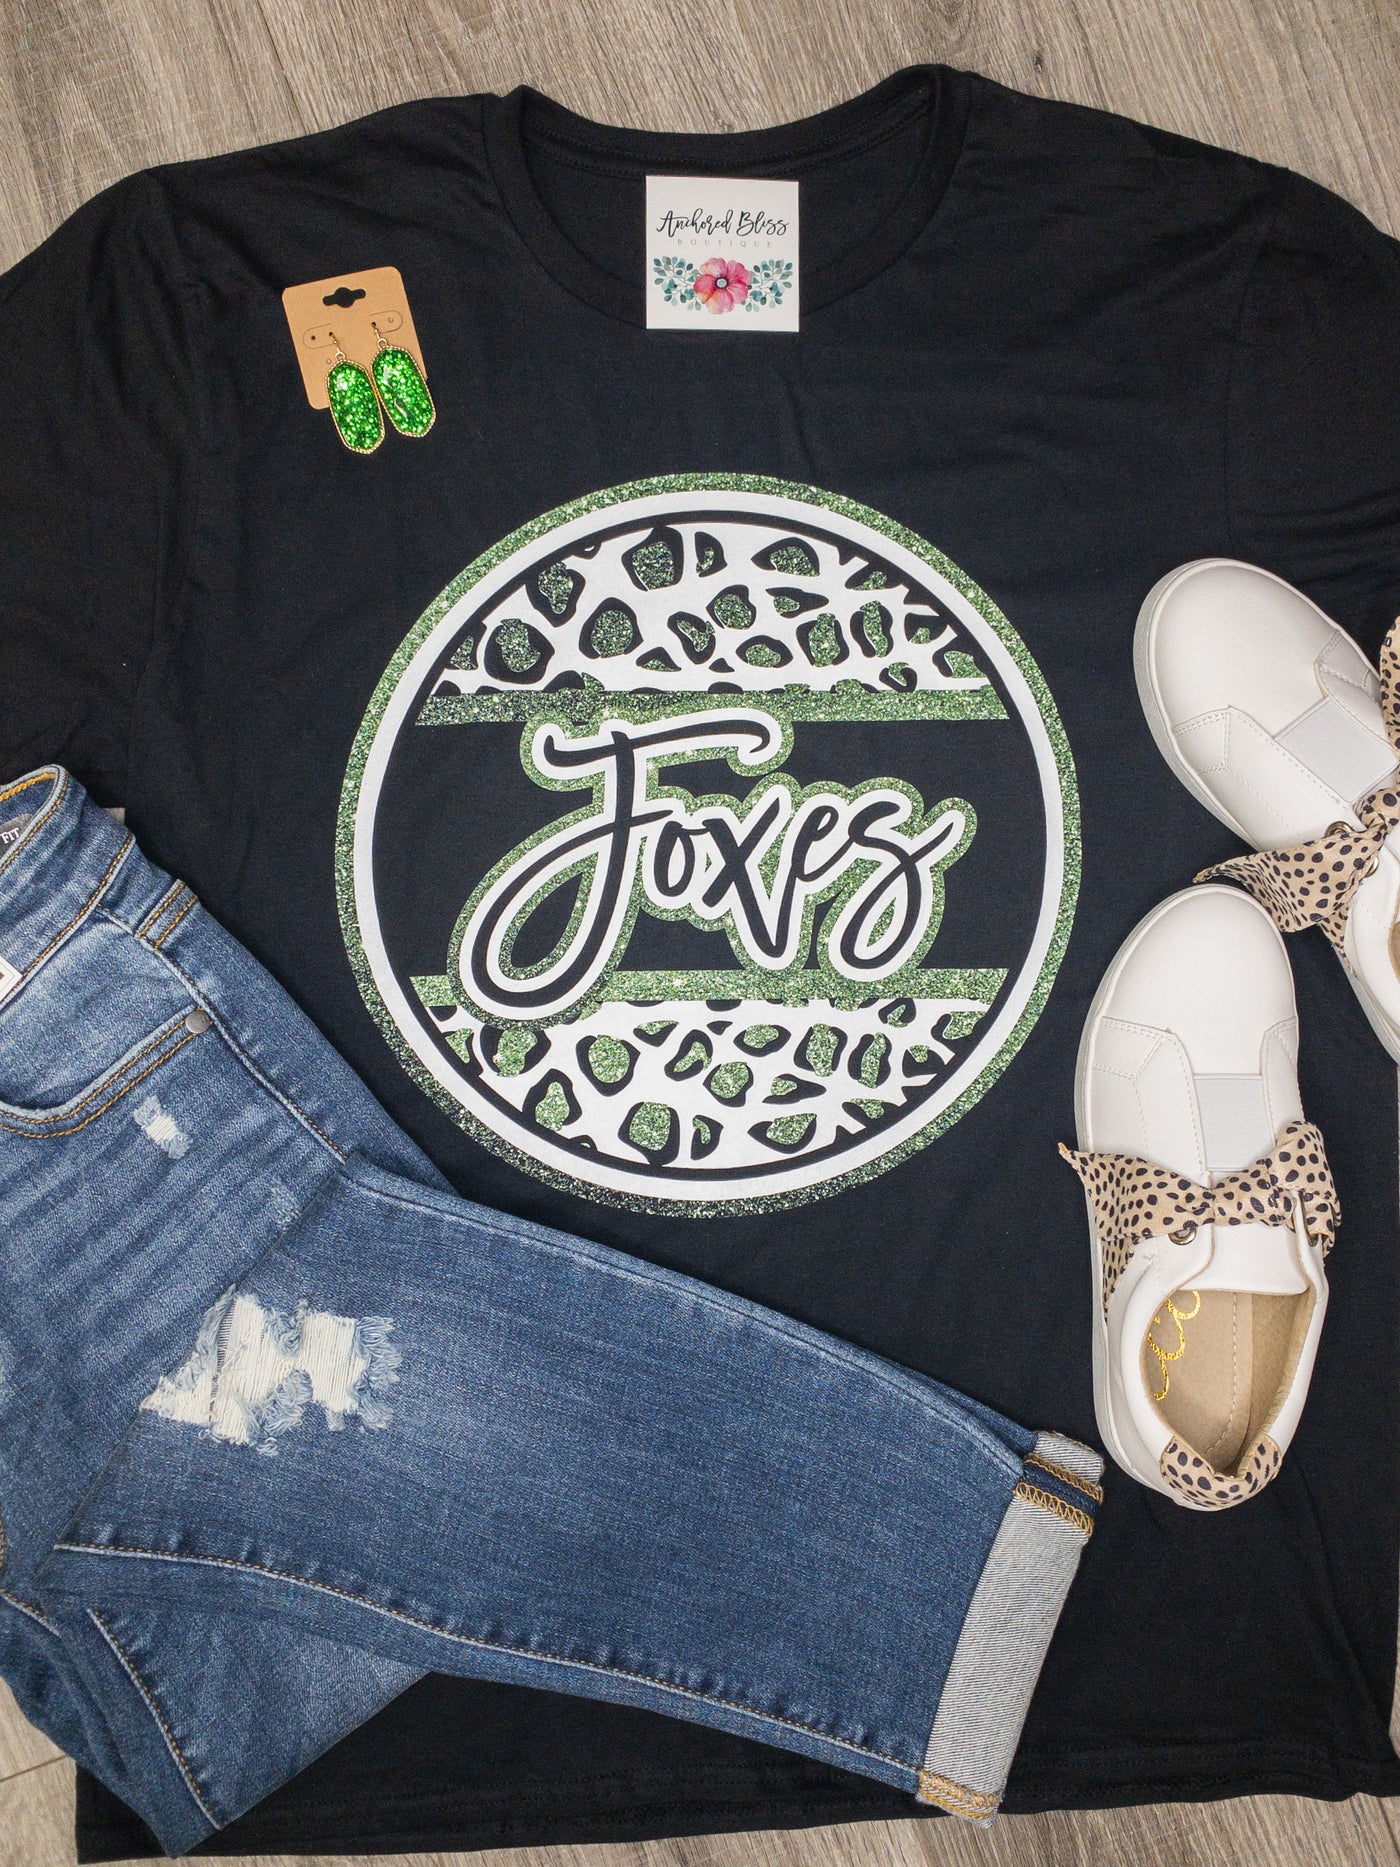 Foxes Leopard Circle Graphic Tee-Harps & Oli-Shop Anchored Bliss Women's Boutique Clothing Store